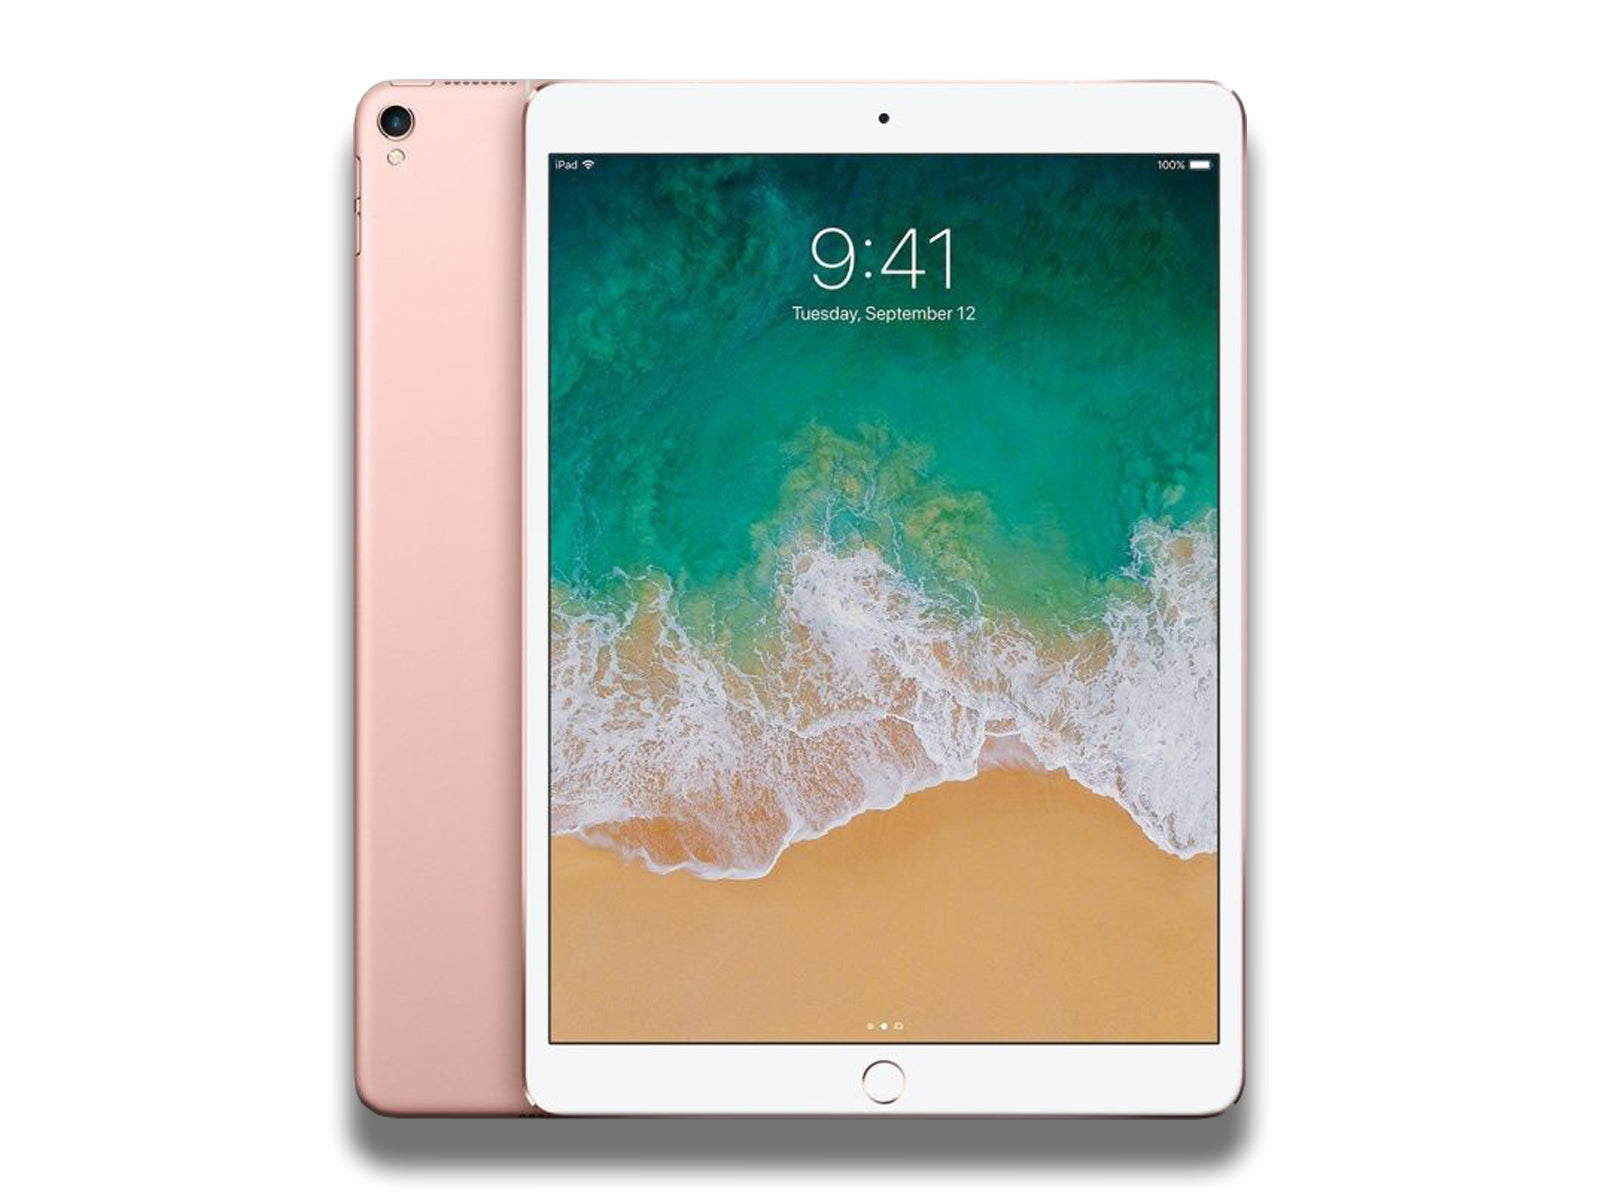 Image shows a front and back view of the Rosegold Apple iPad Pro 10.5-inch